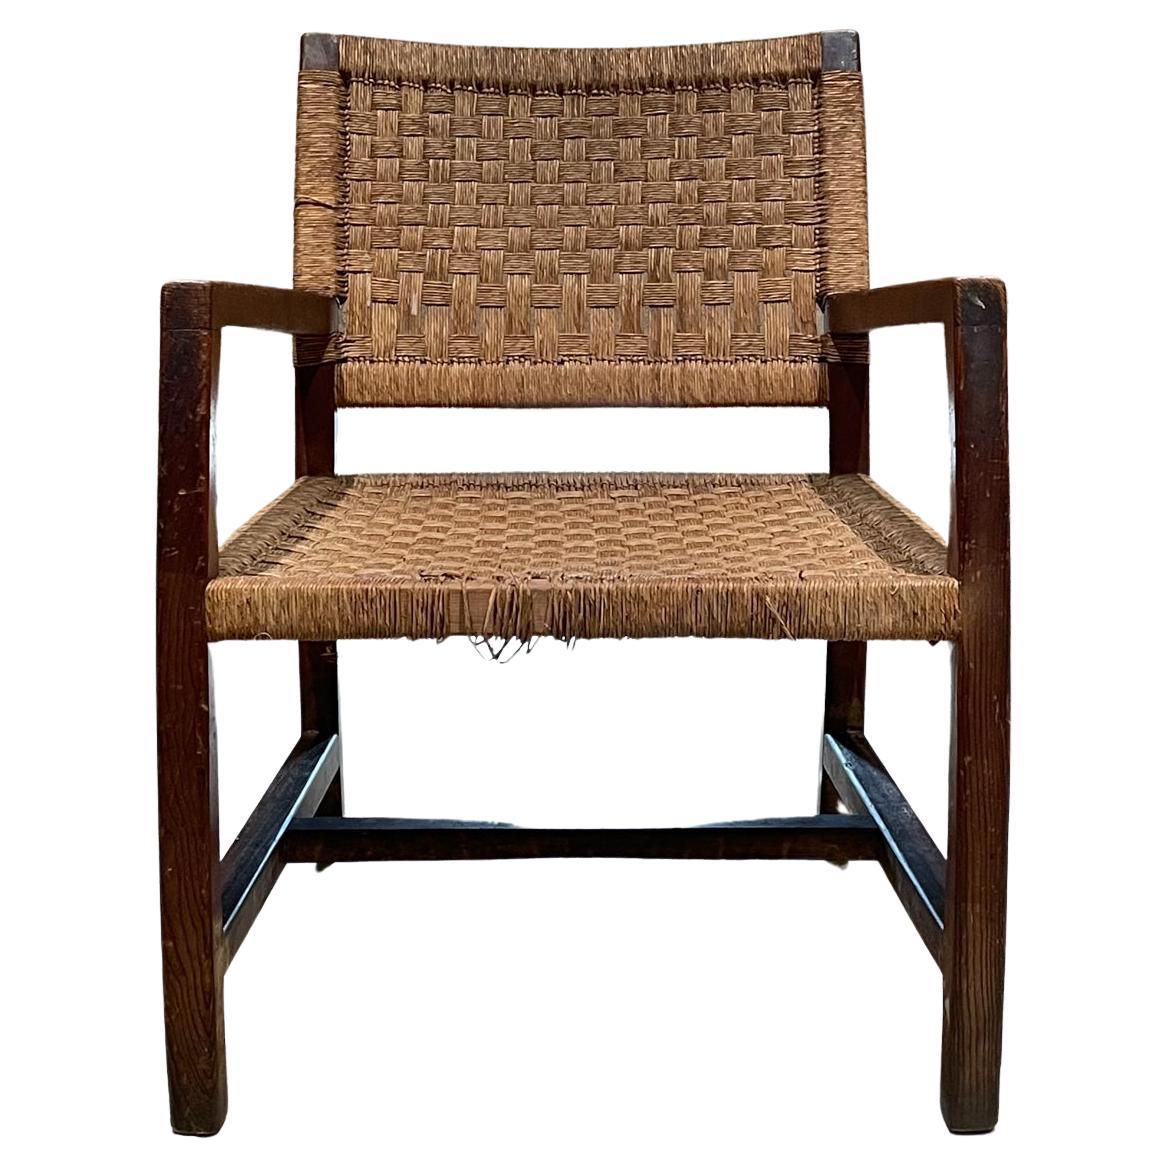 Armchair
1940s Easy armchair style of Clara Porset Mexico in red pine wood seagrass rope
Preowned unrestored vintage condition. Slight damage front of seat. 
Original patina and wear visible on wood. 
Review images provided.
Measures: 30.75